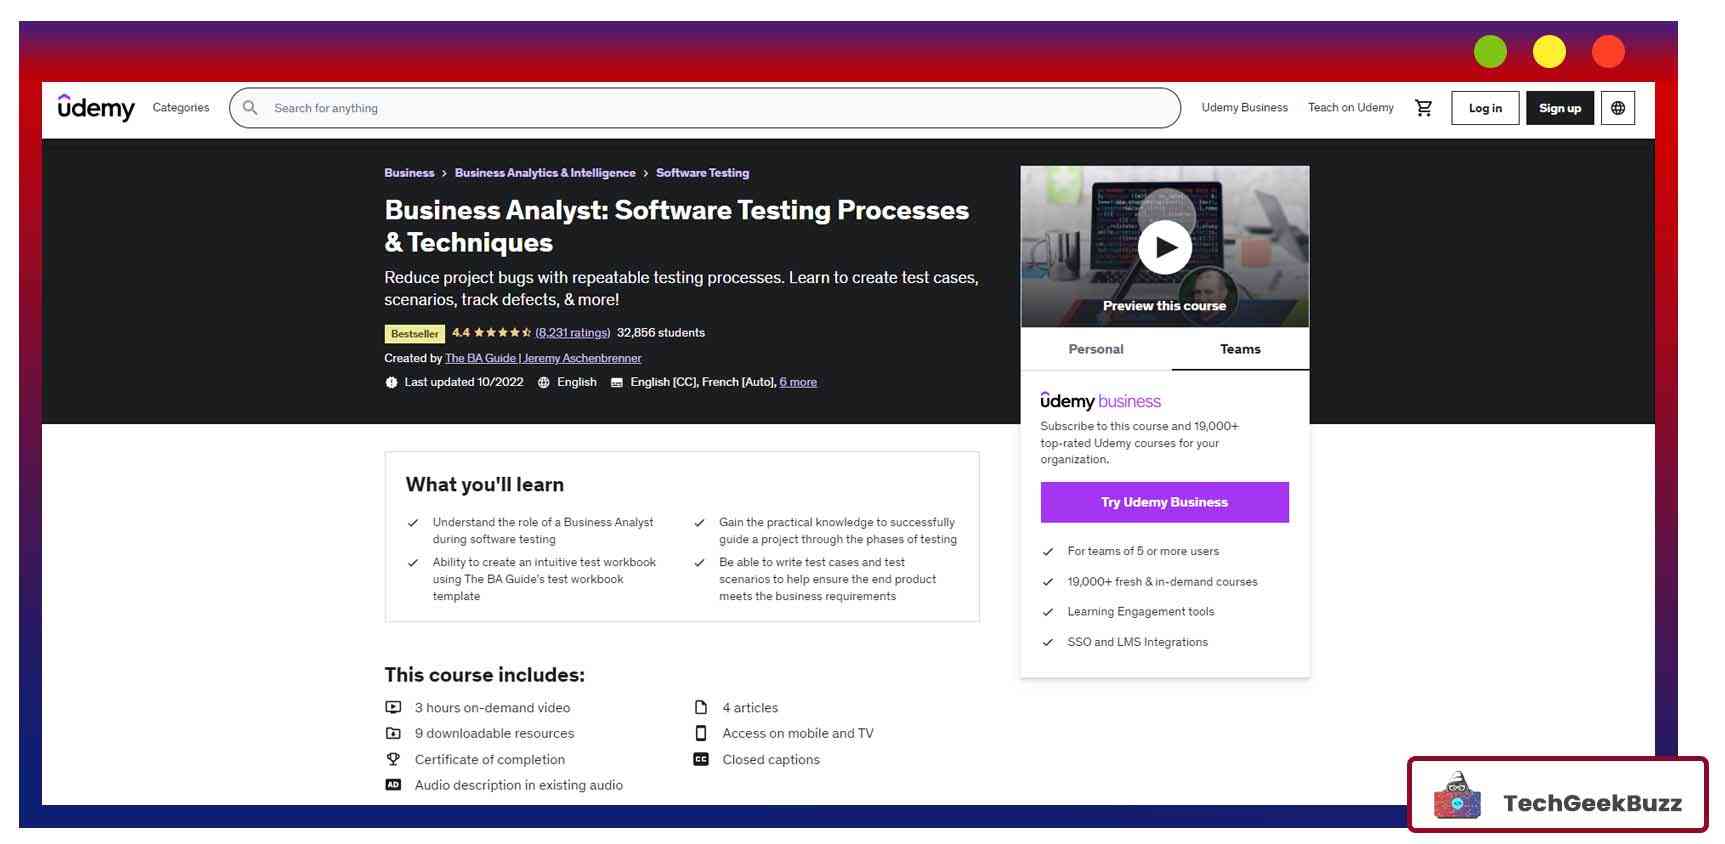 Business Analyst: Software Testing Processes & Techniques